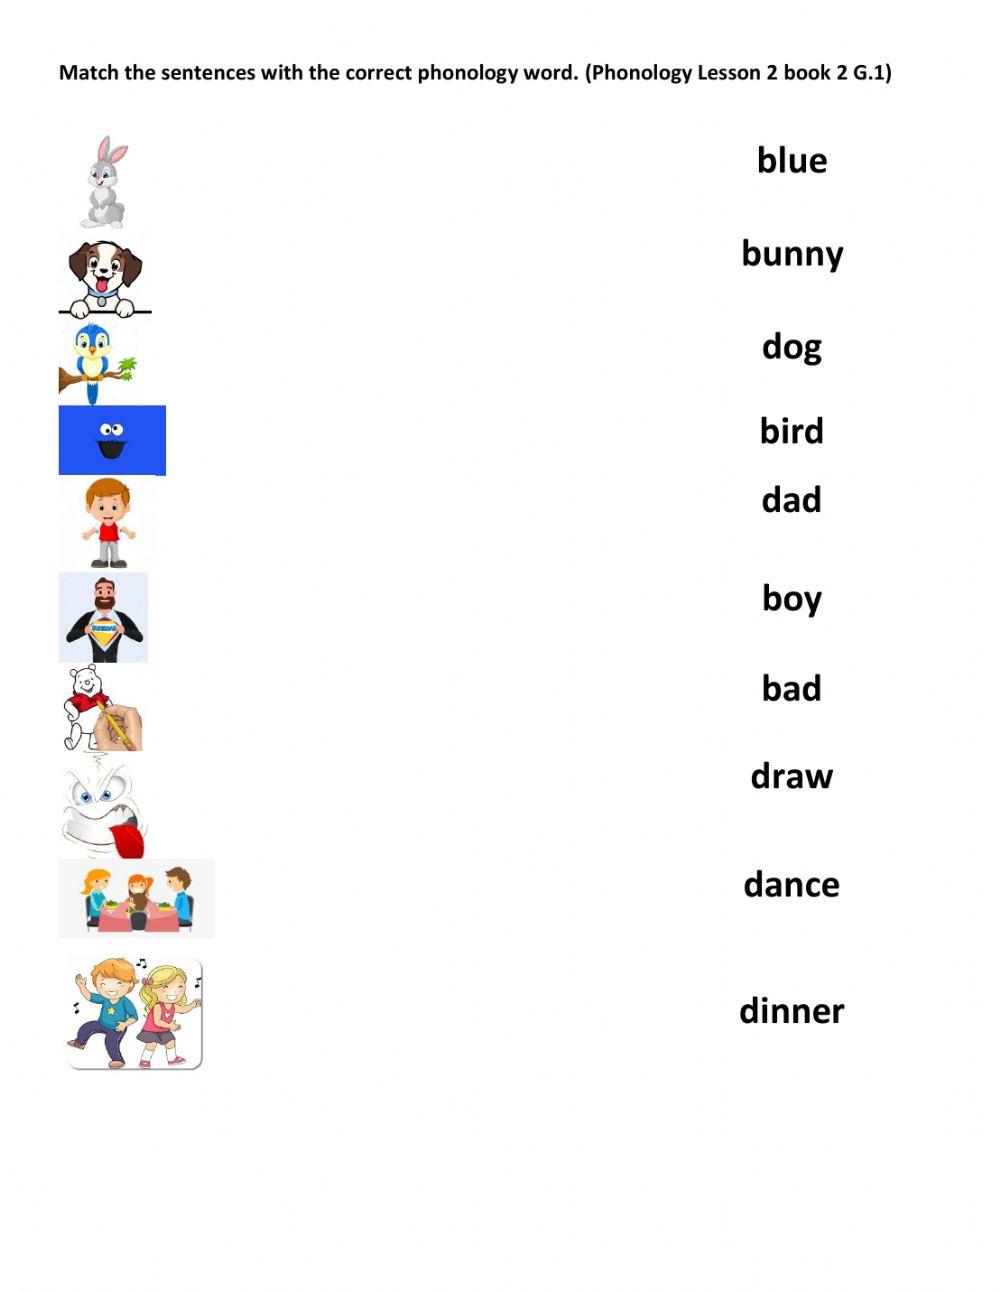 Phonology Lesson 2 Book 2